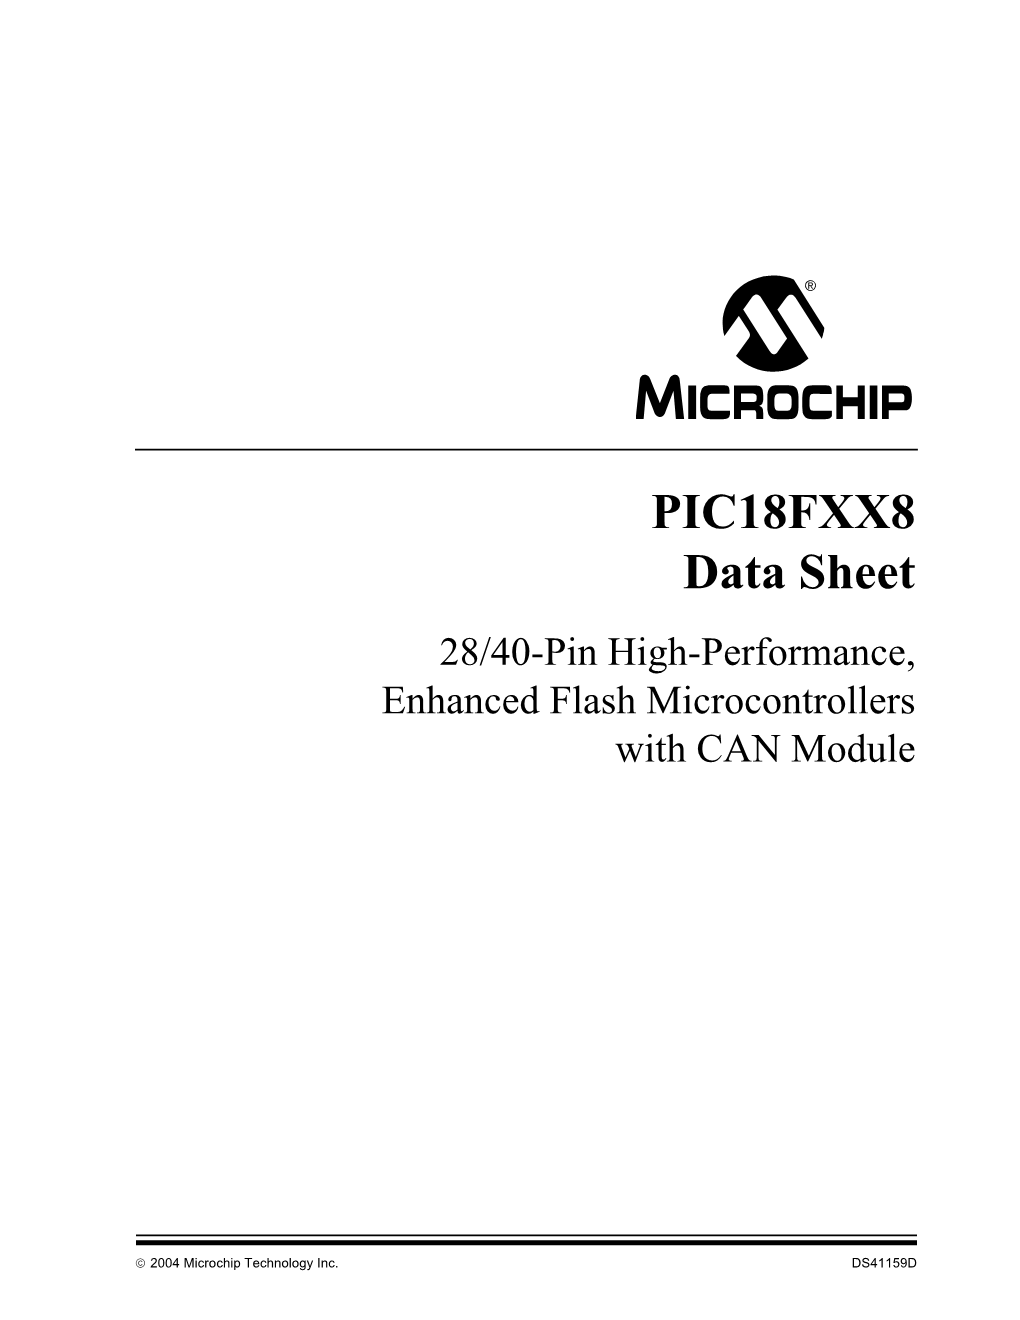 PIC18FXX8 Data Sheet 28/40-Pin High-Performance, Enhanced Flash Microcontrollers with CAN Module